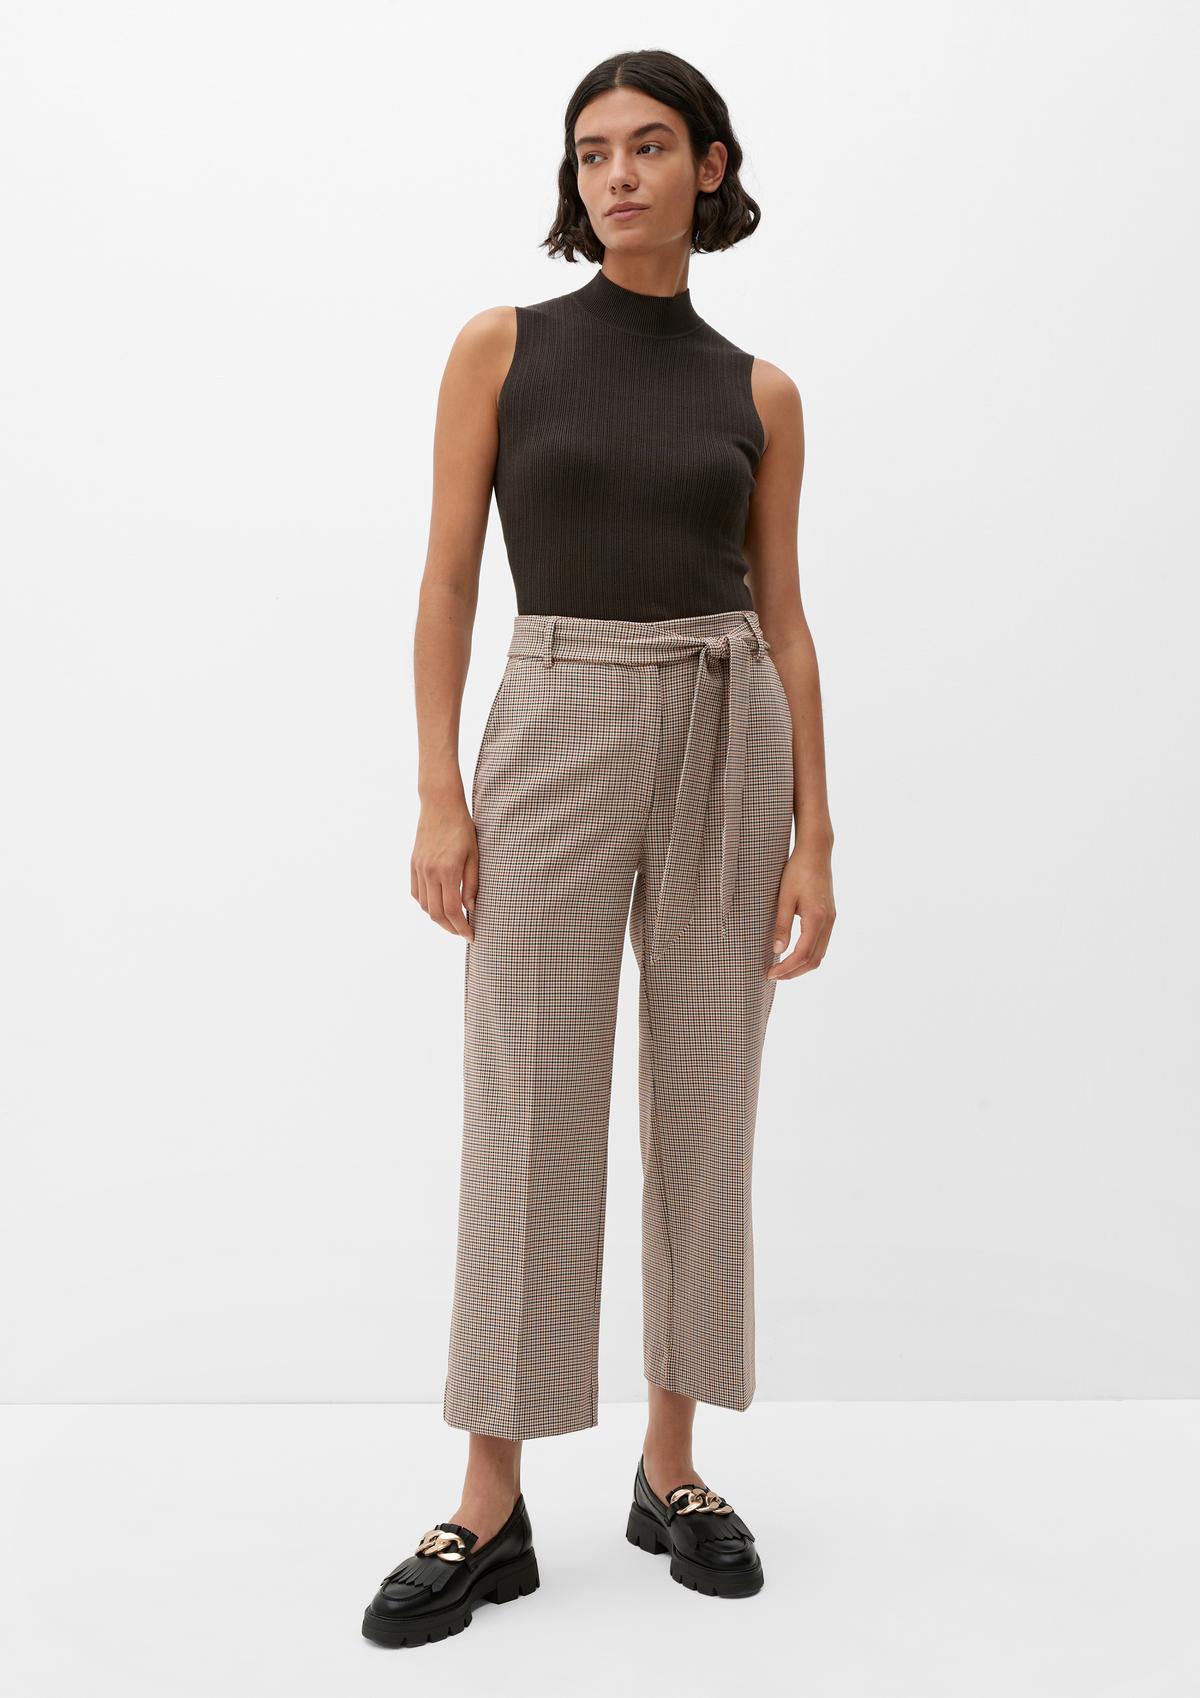 Culottes: Order now shop the in online